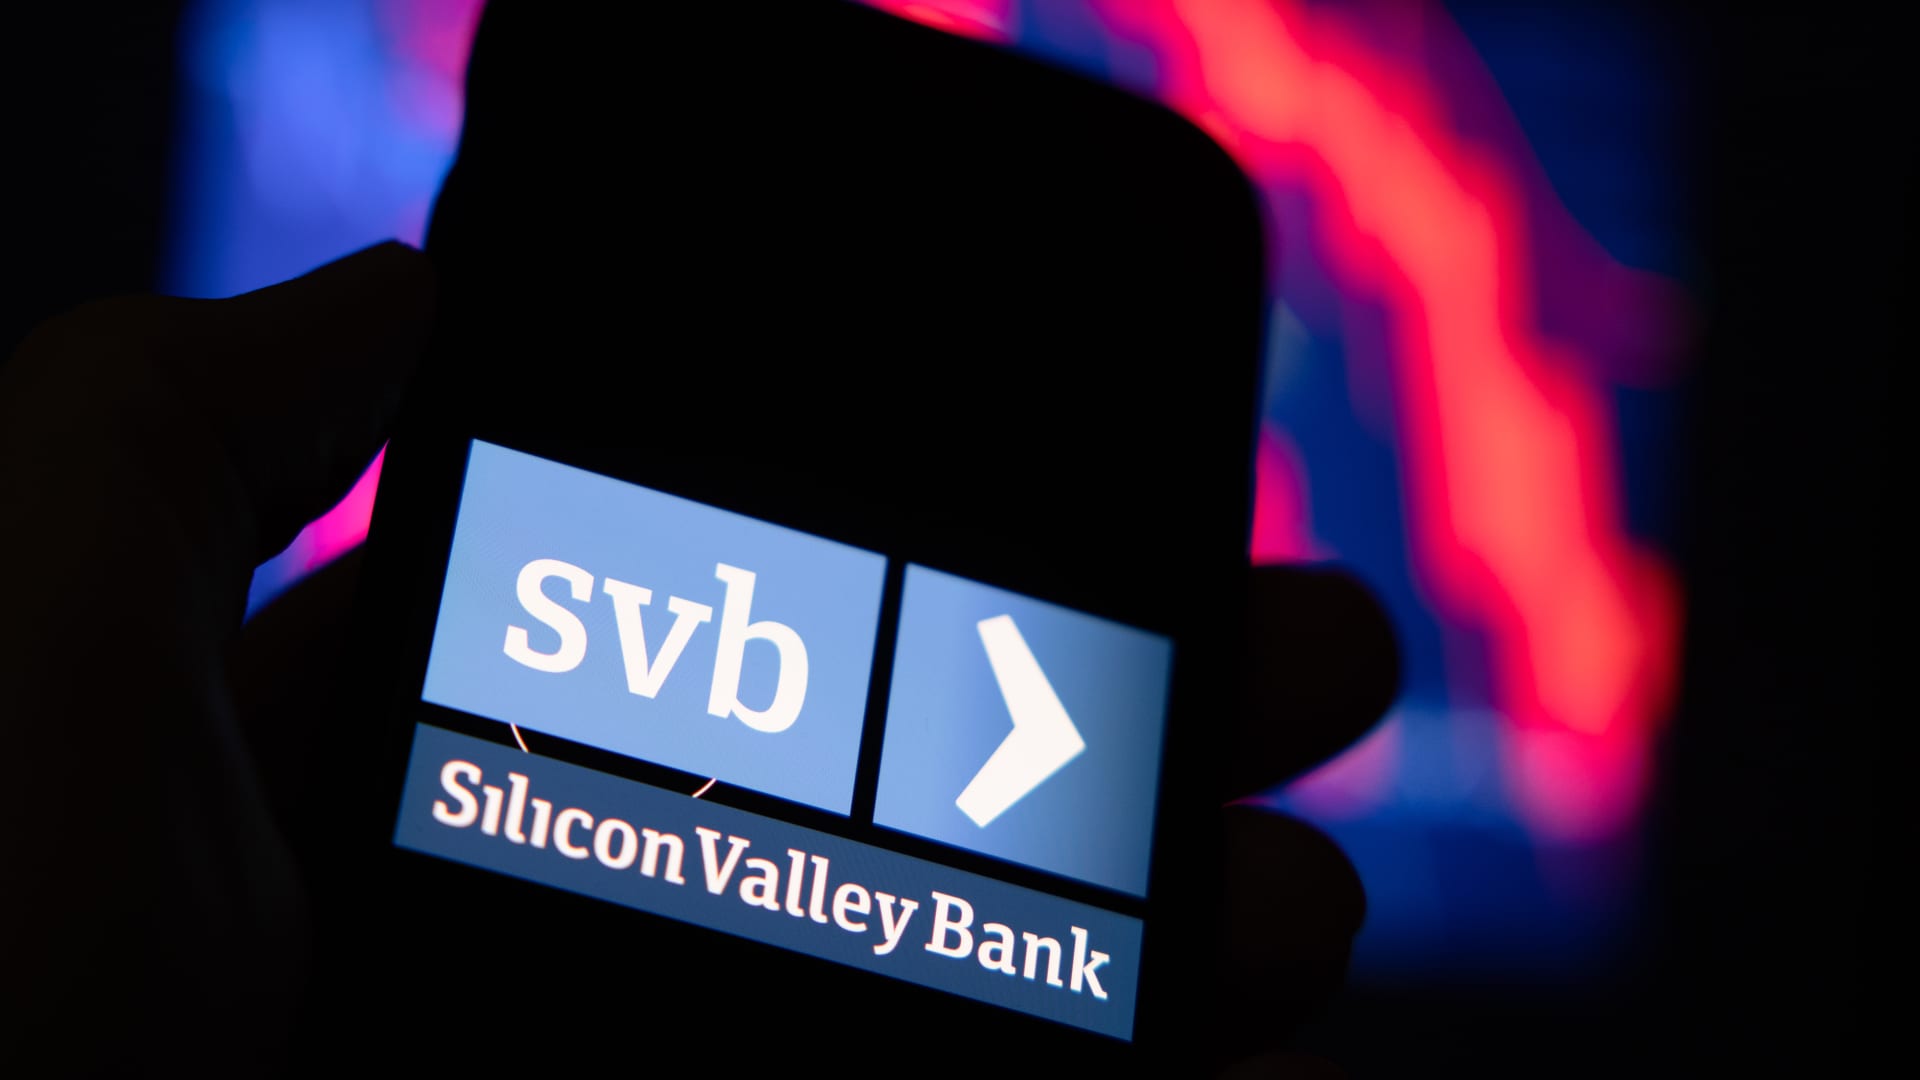 Money manager tackles SVB fallout on ETFs